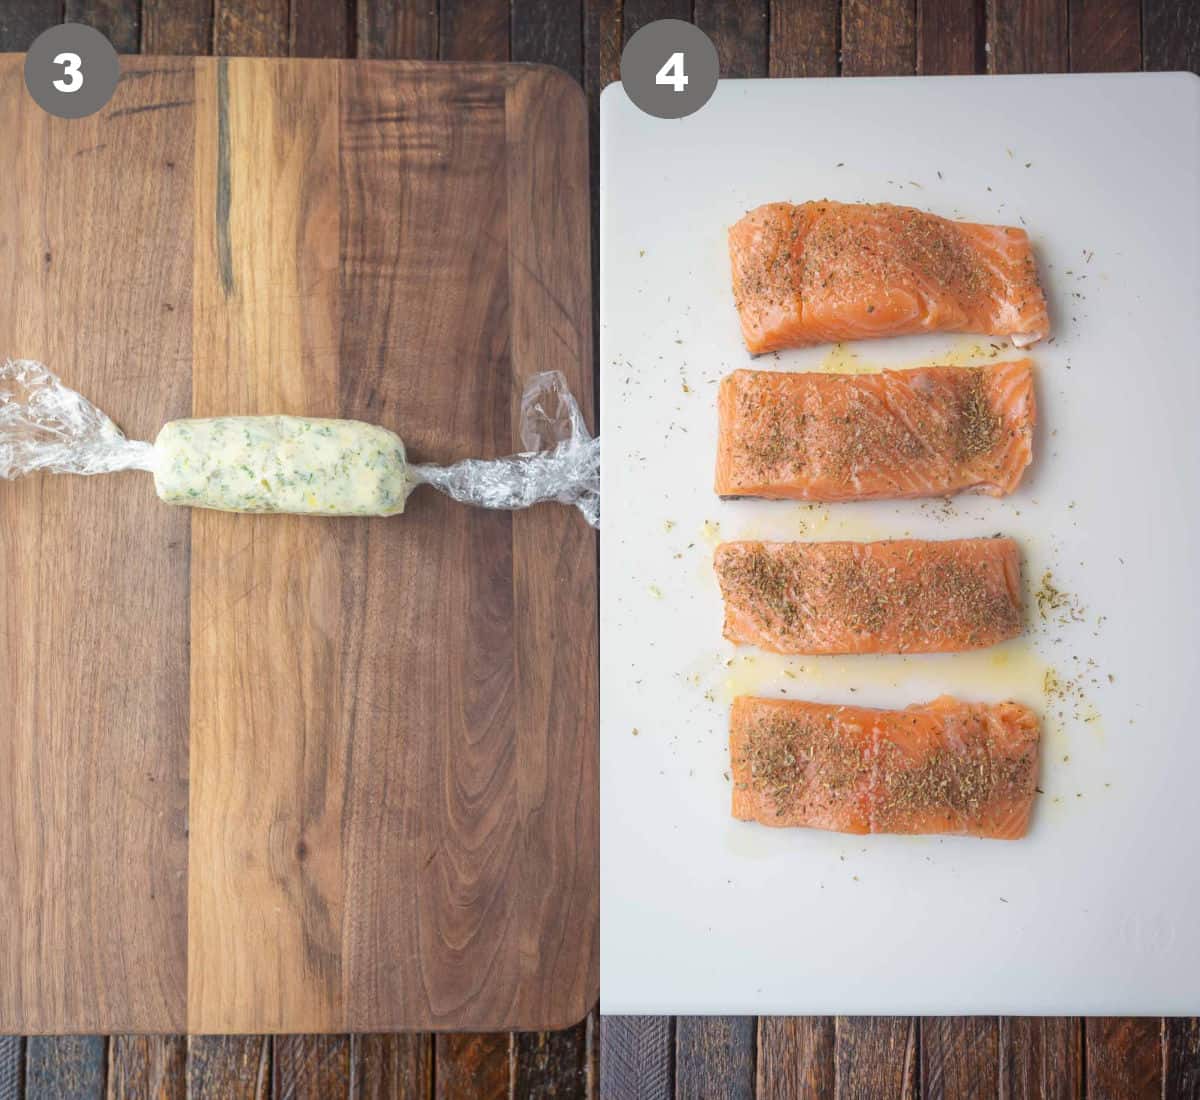 Herb butter rolled up into a log and wrapped in plastic wrap. Salmon filets placed on a cutting board.